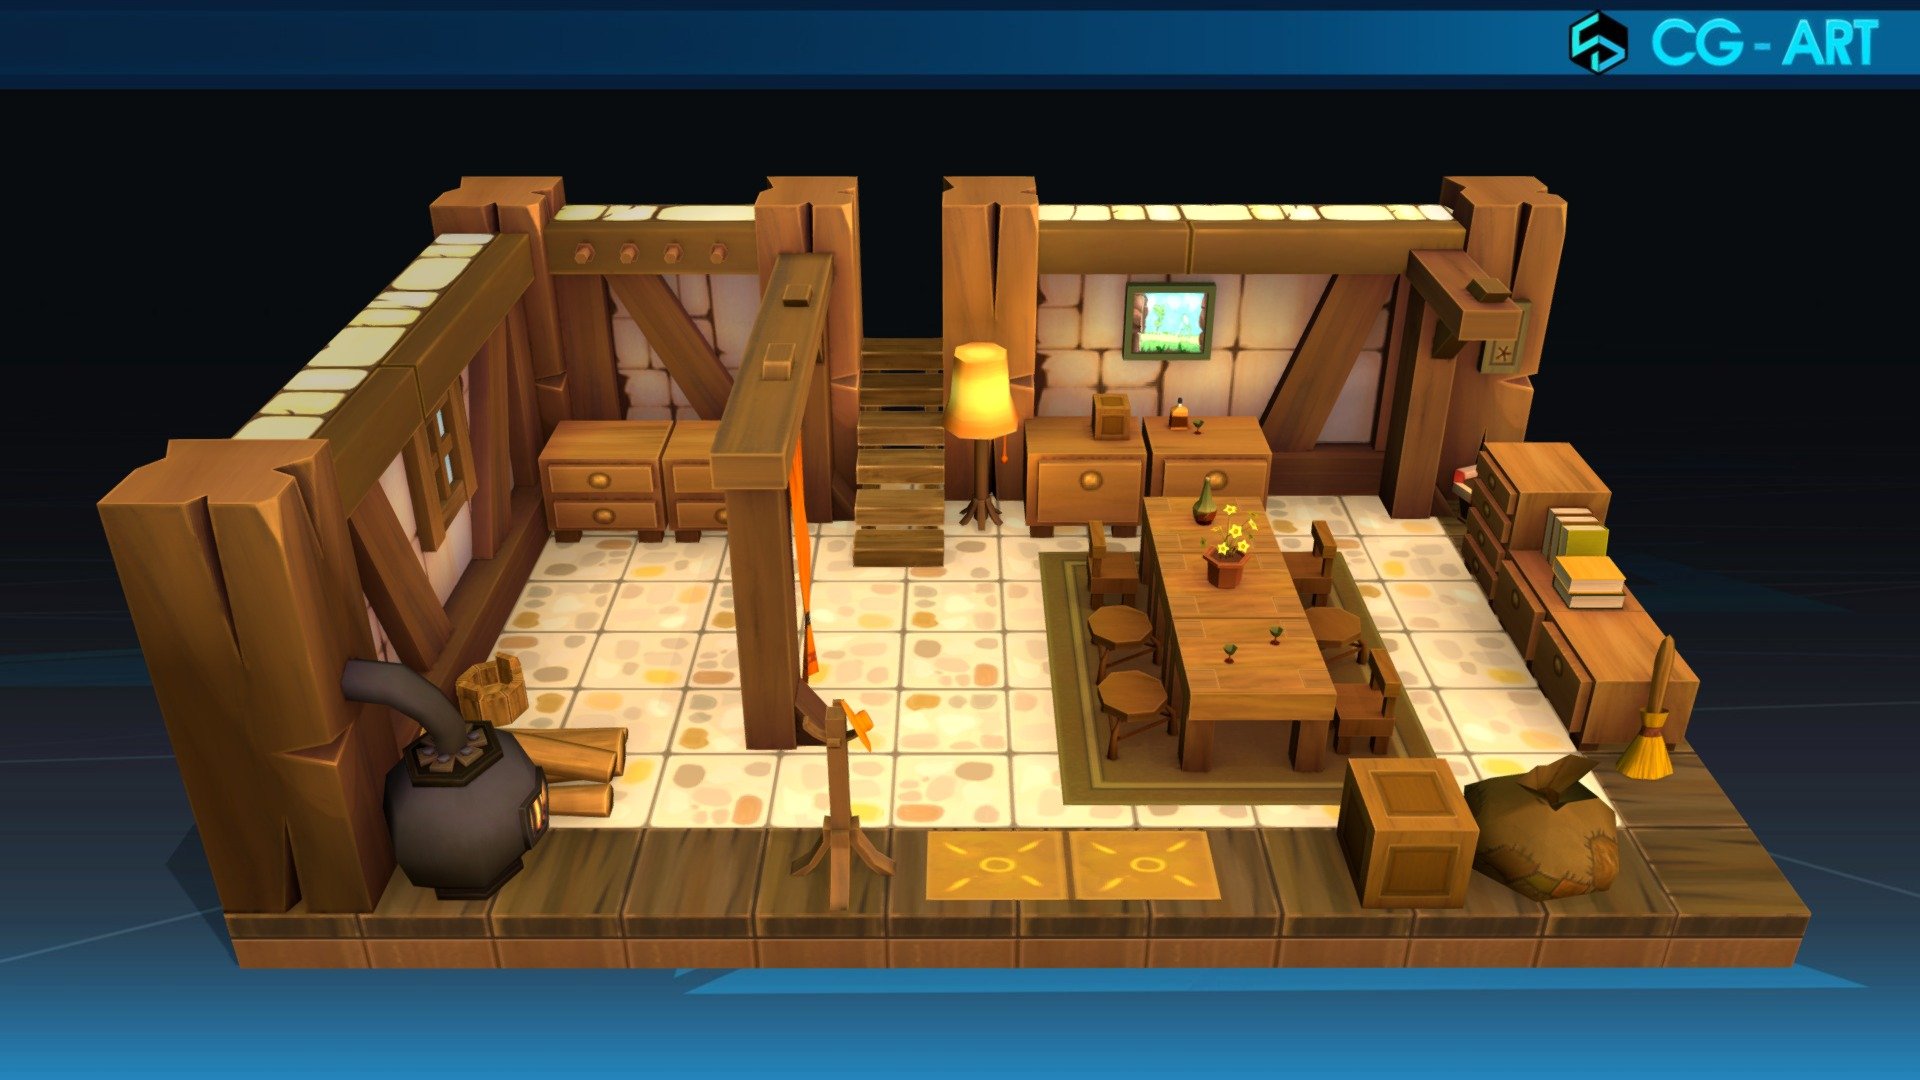 Inspired by the unique design of houses for players in the game Dofus, we continue to turn them into visual 3D models to show our love for this game.

Concept by


http://dofus.jeuxonline.info/actualite/35870/devblog-refontes-graphique-27
 - Players' Houses 01_Sufokia Dofus - 3D model by cgart.com (@goart) 3d model